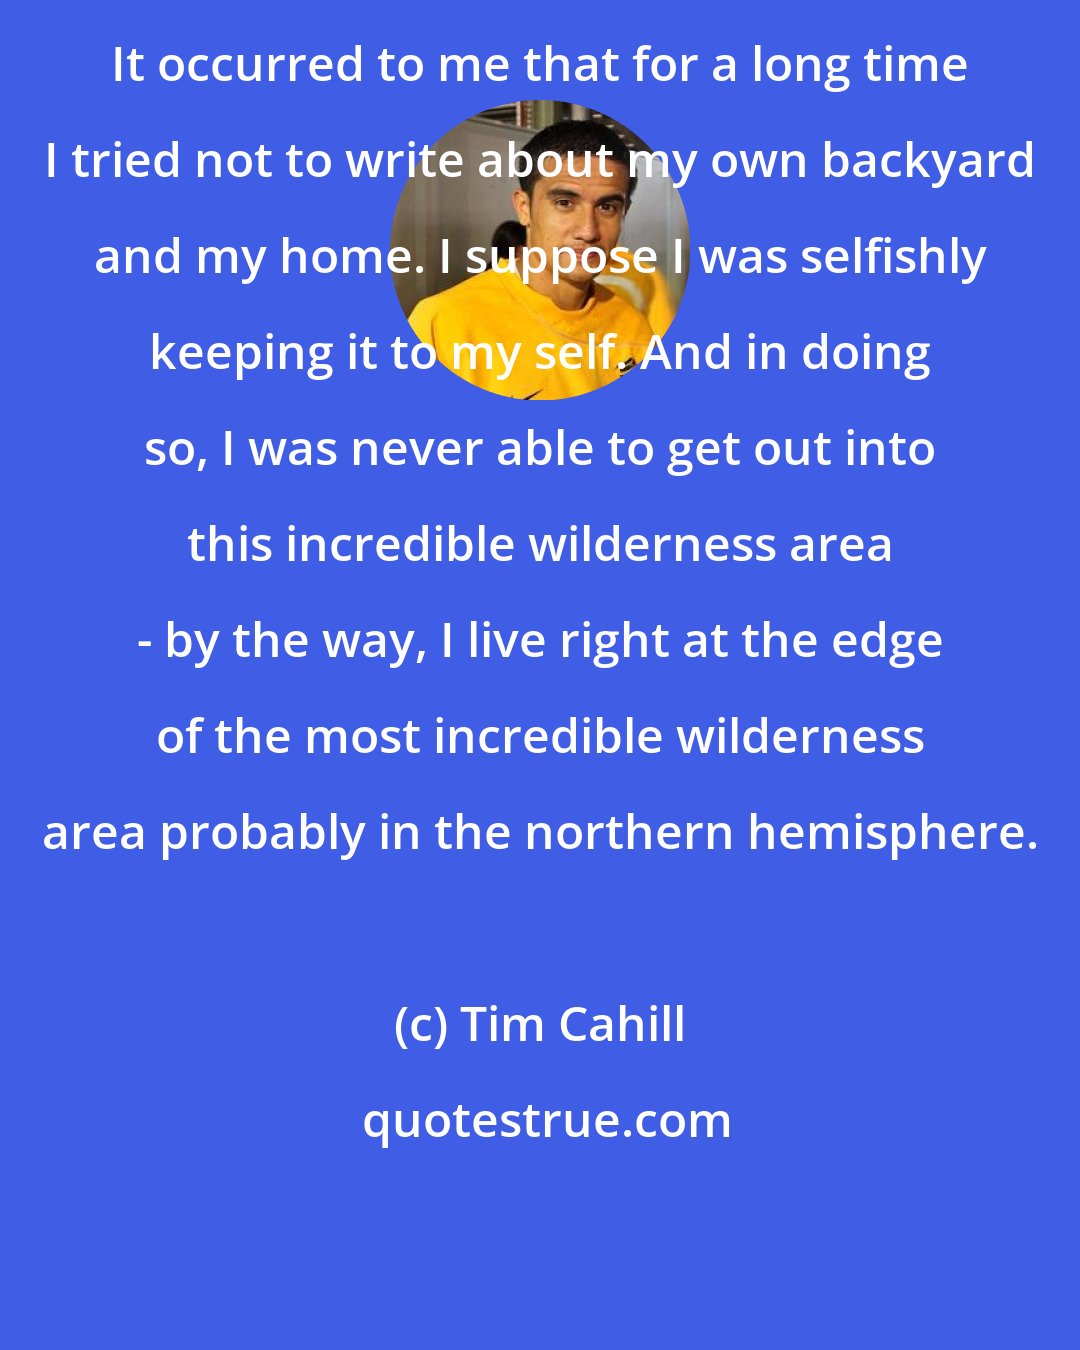 Tim Cahill: It occurred to me that for a long time I tried not to write about my own backyard and my home. I suppose I was selfishly keeping it to my self. And in doing so, I was never able to get out into this incredible wilderness area - by the way, I live right at the edge of the most incredible wilderness area probably in the northern hemisphere.